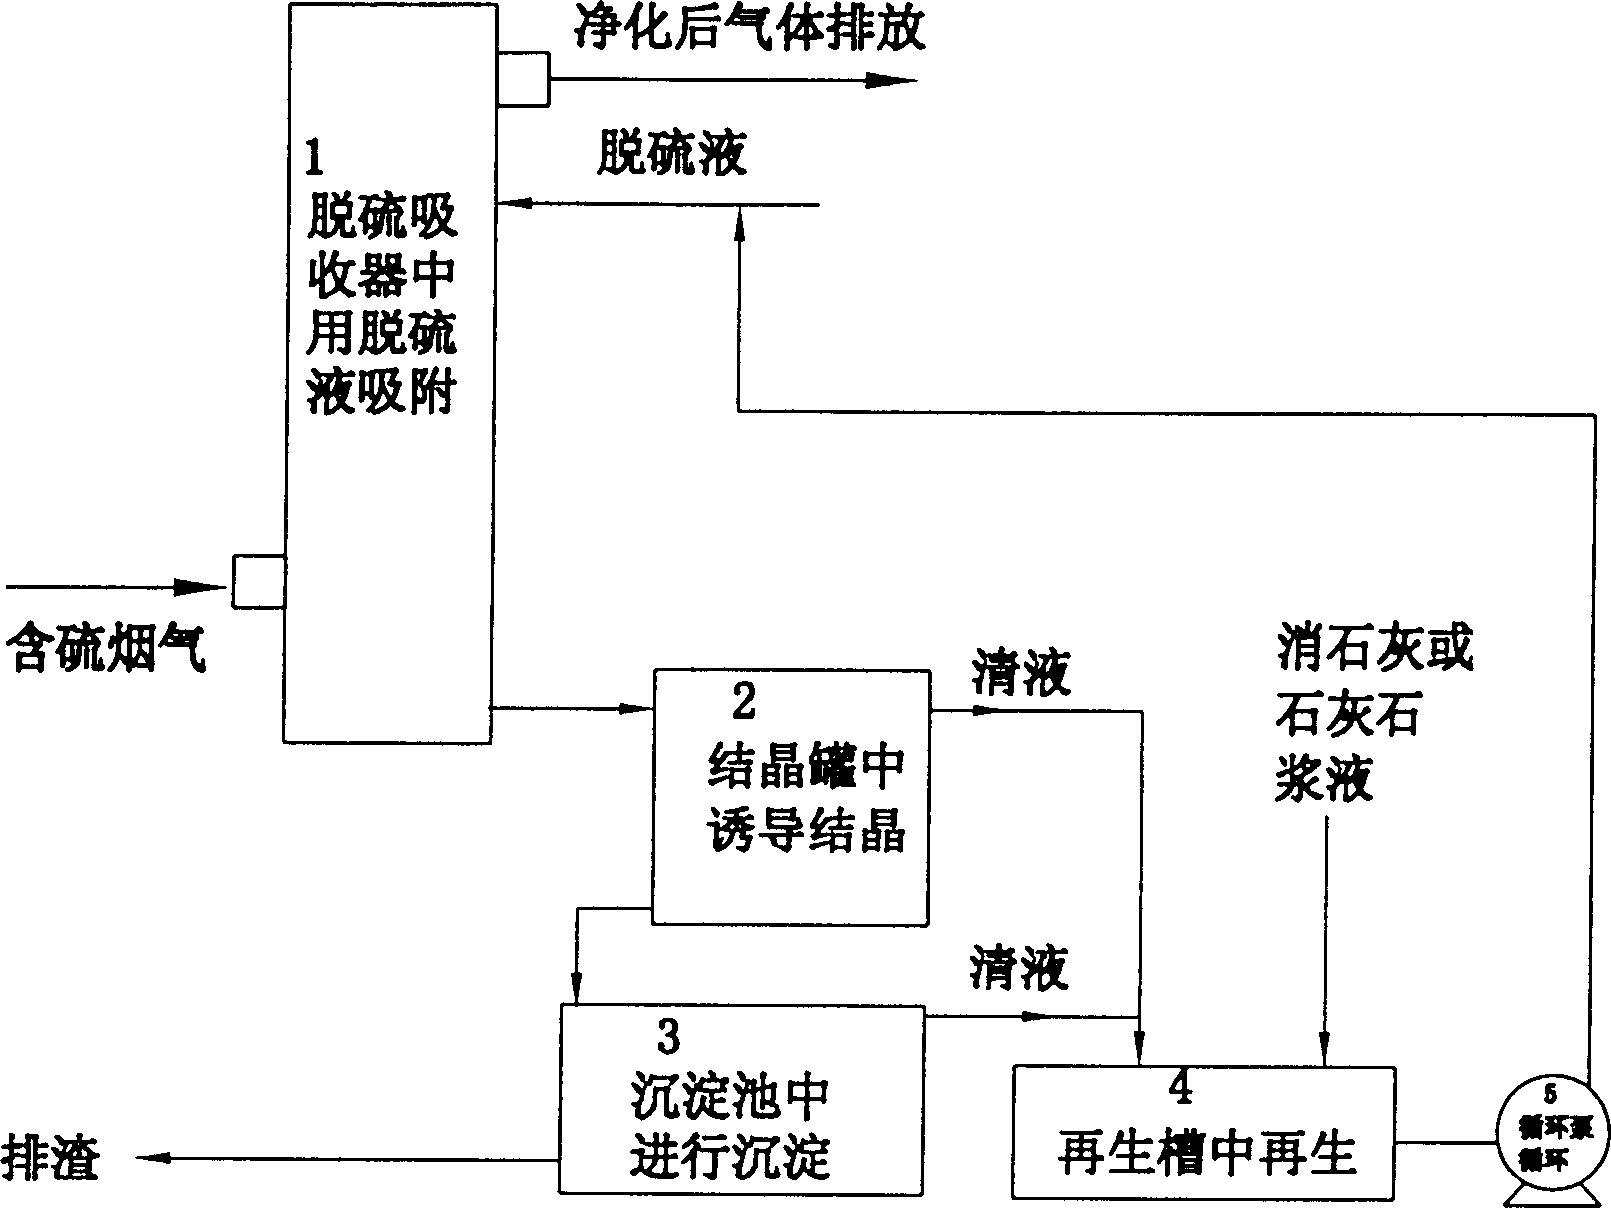 Double alkali method flue desulfurizing and dust collecting induction and crystallization process for reuse